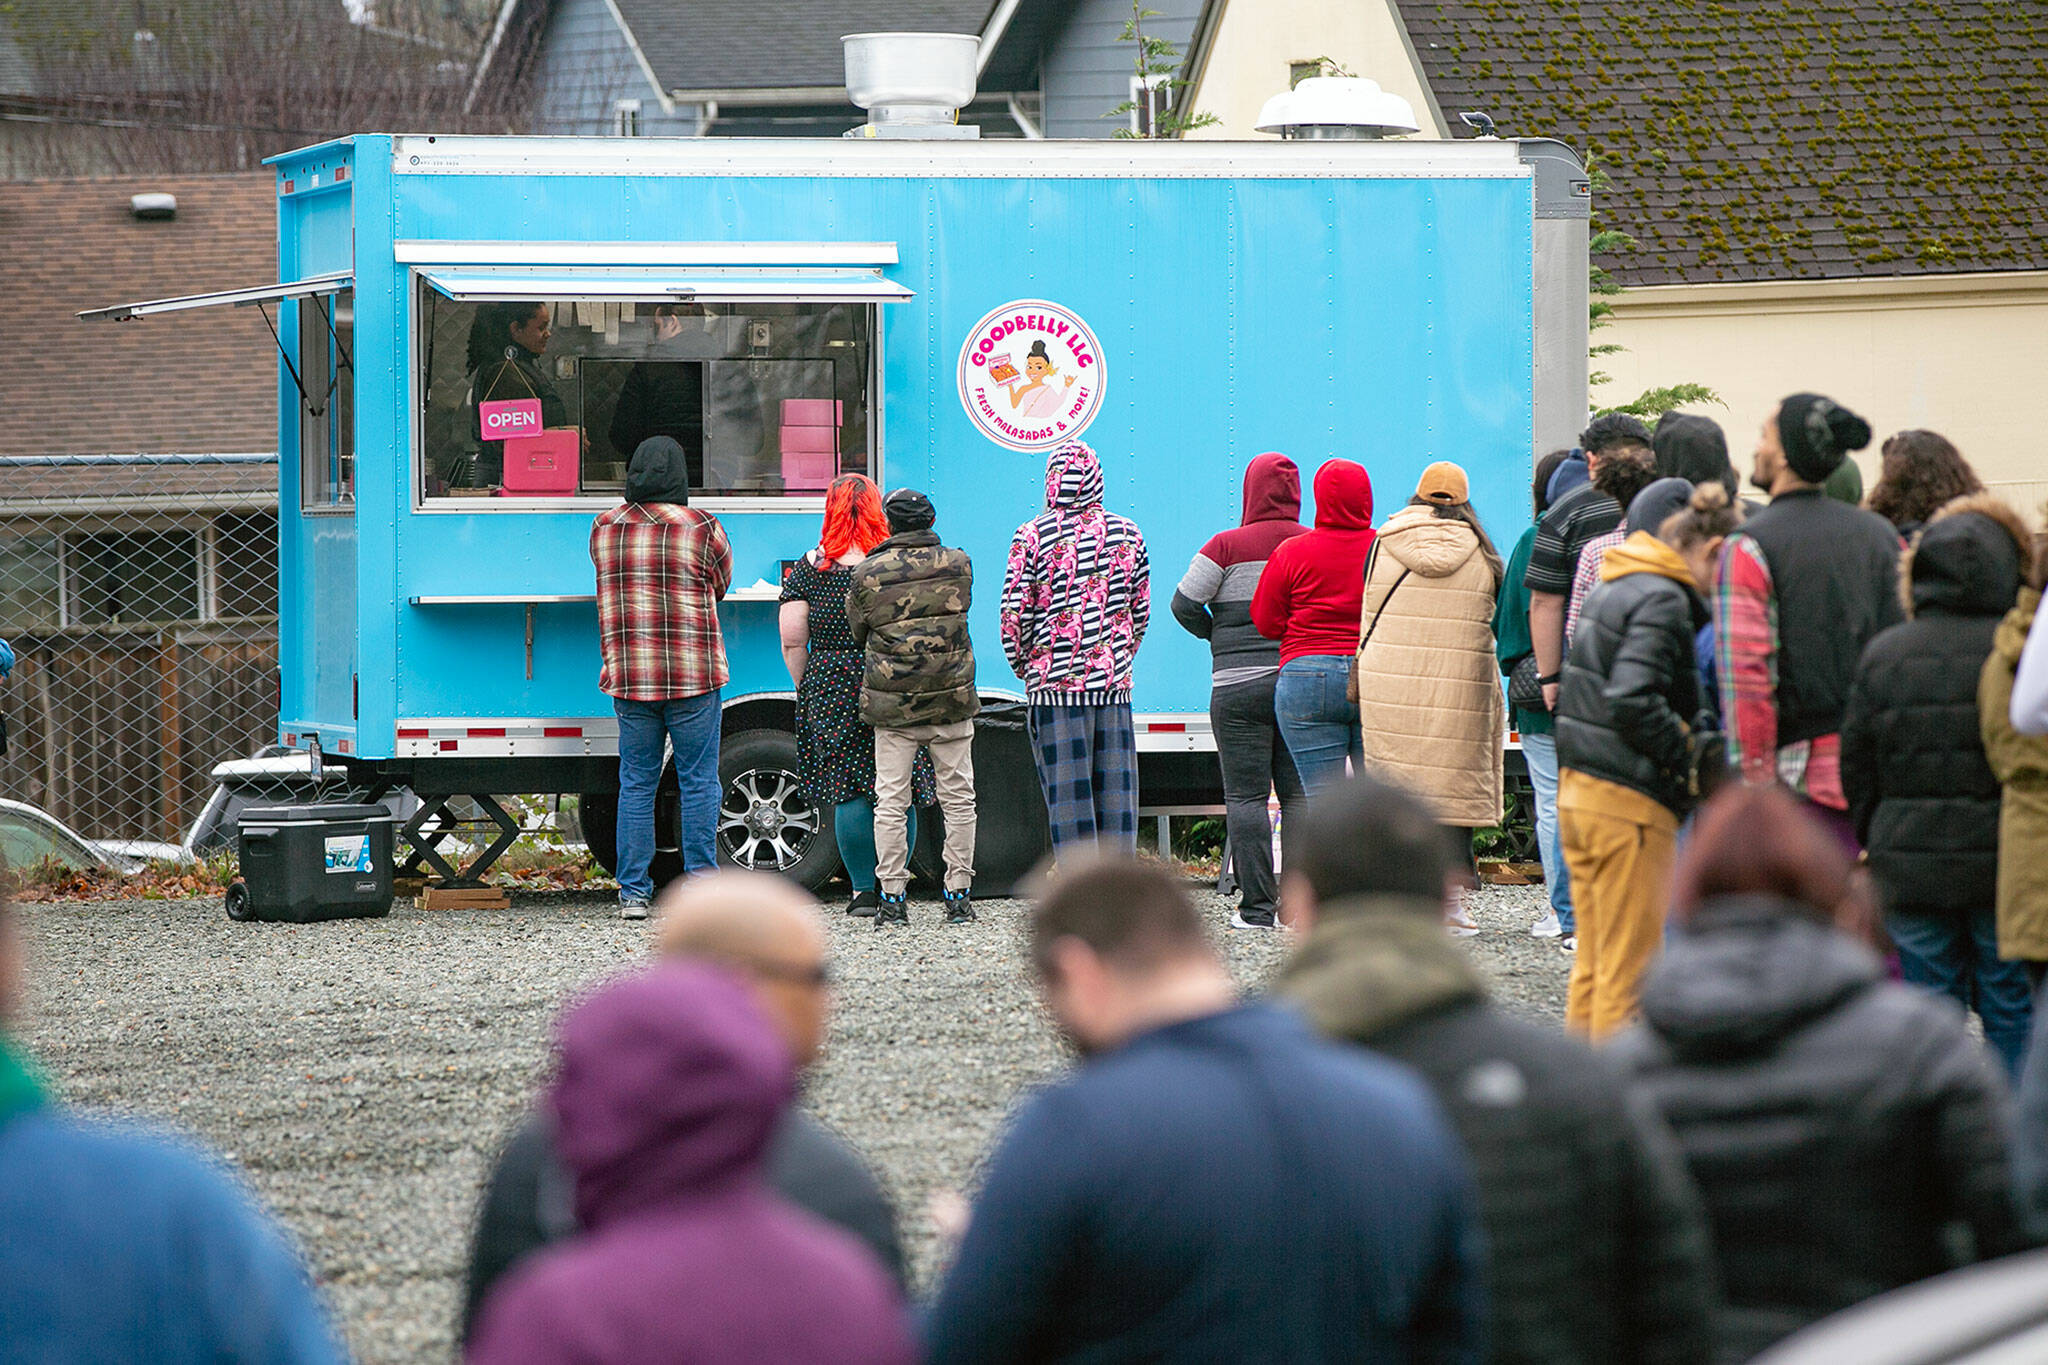 Nearly 100 people wait to place their orders at Alice Tum’s food trailer on its opening day Jan. 28 in Everett. (Ryan Berry / The Herald)